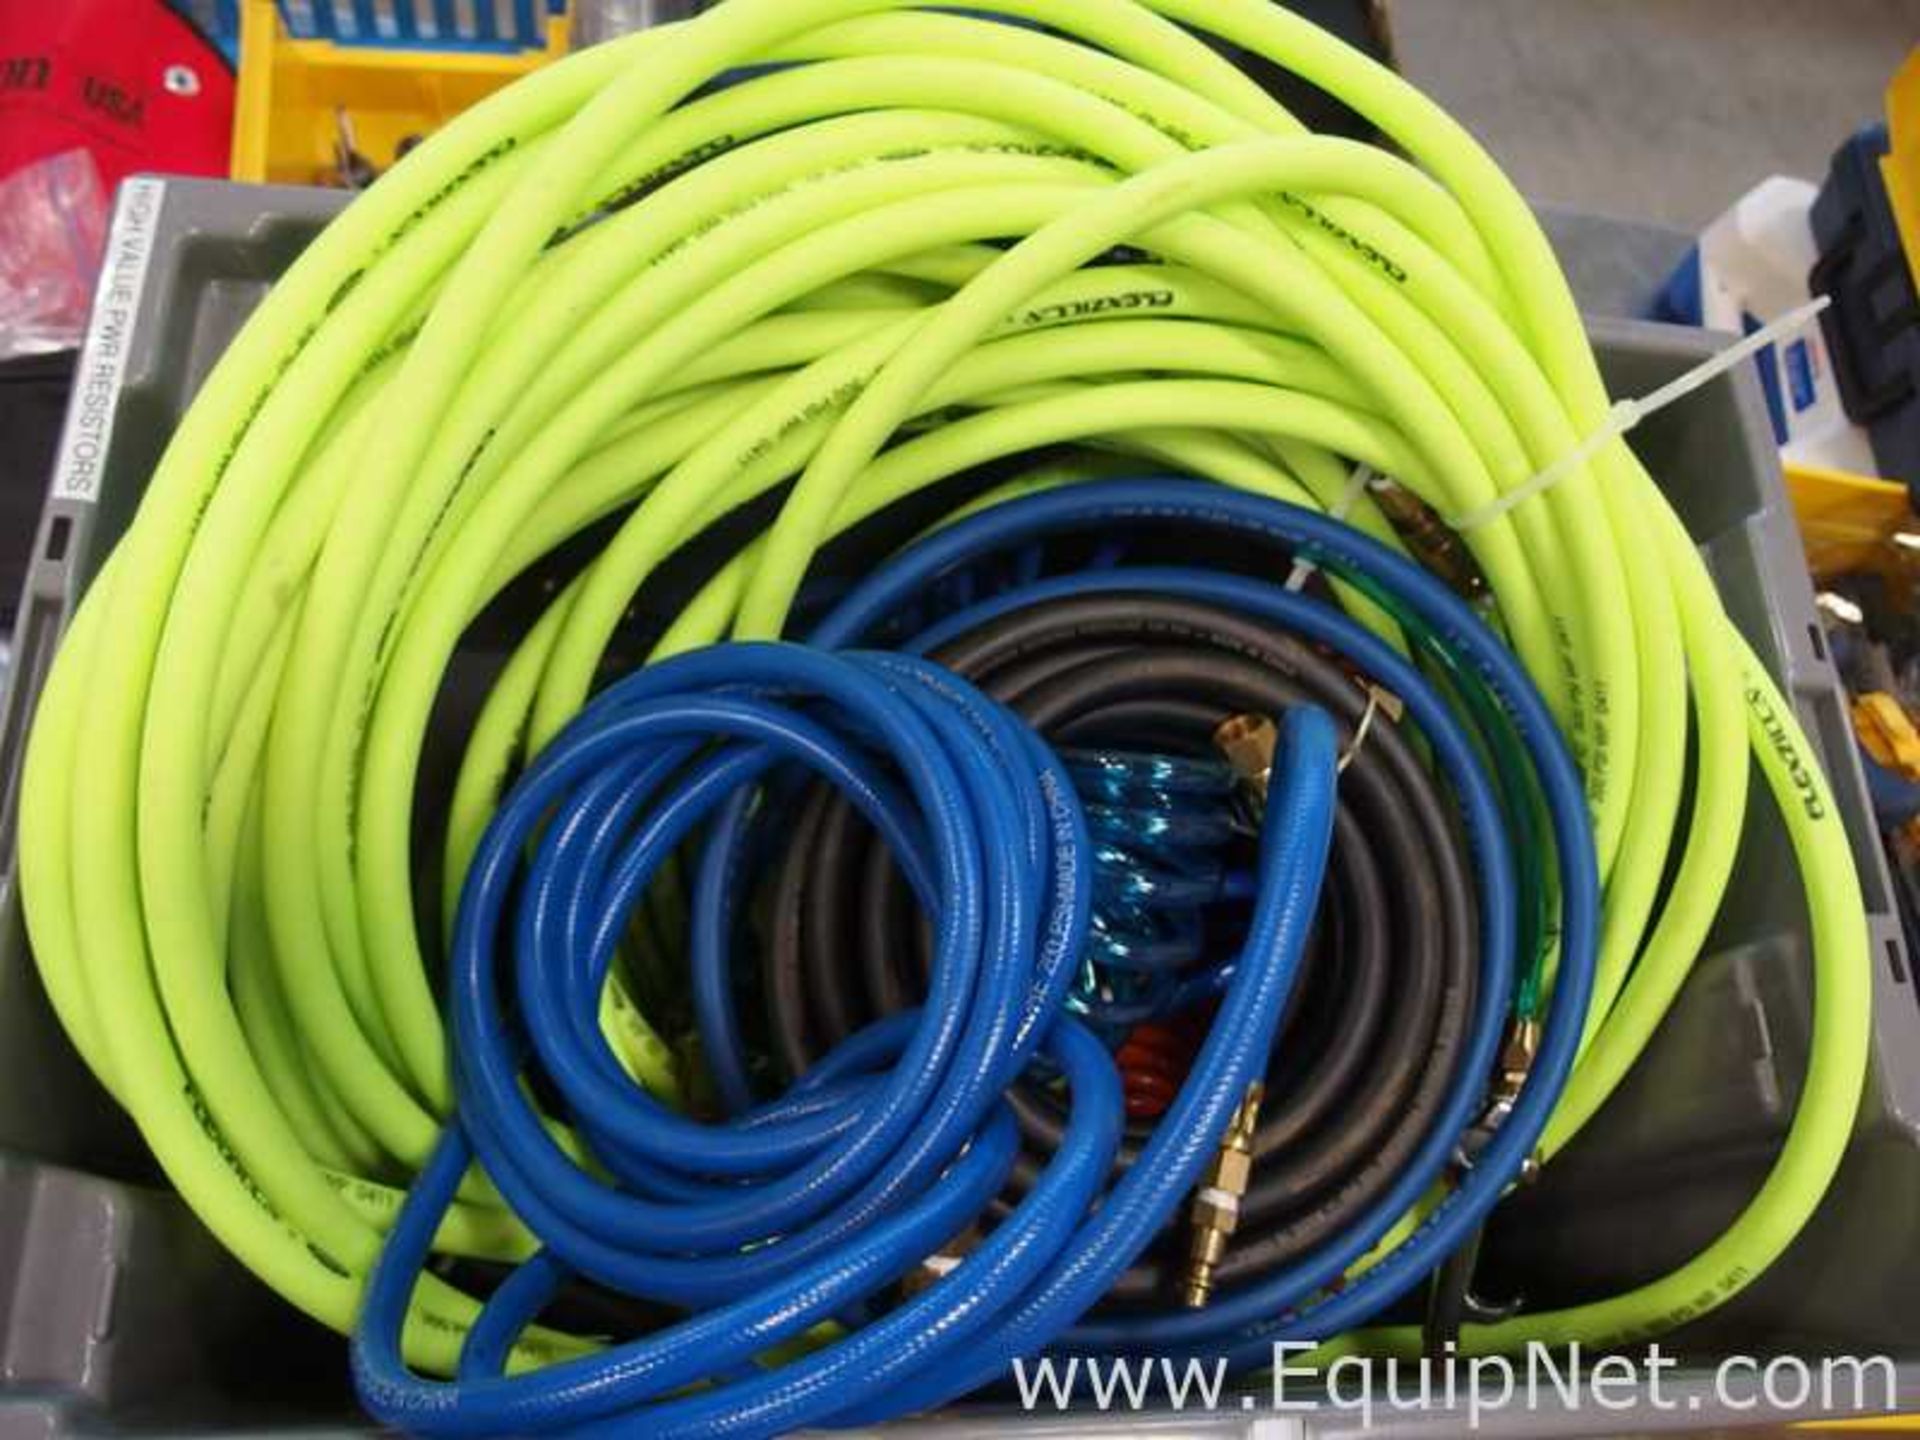 Lot of Air Hoses and Gauges